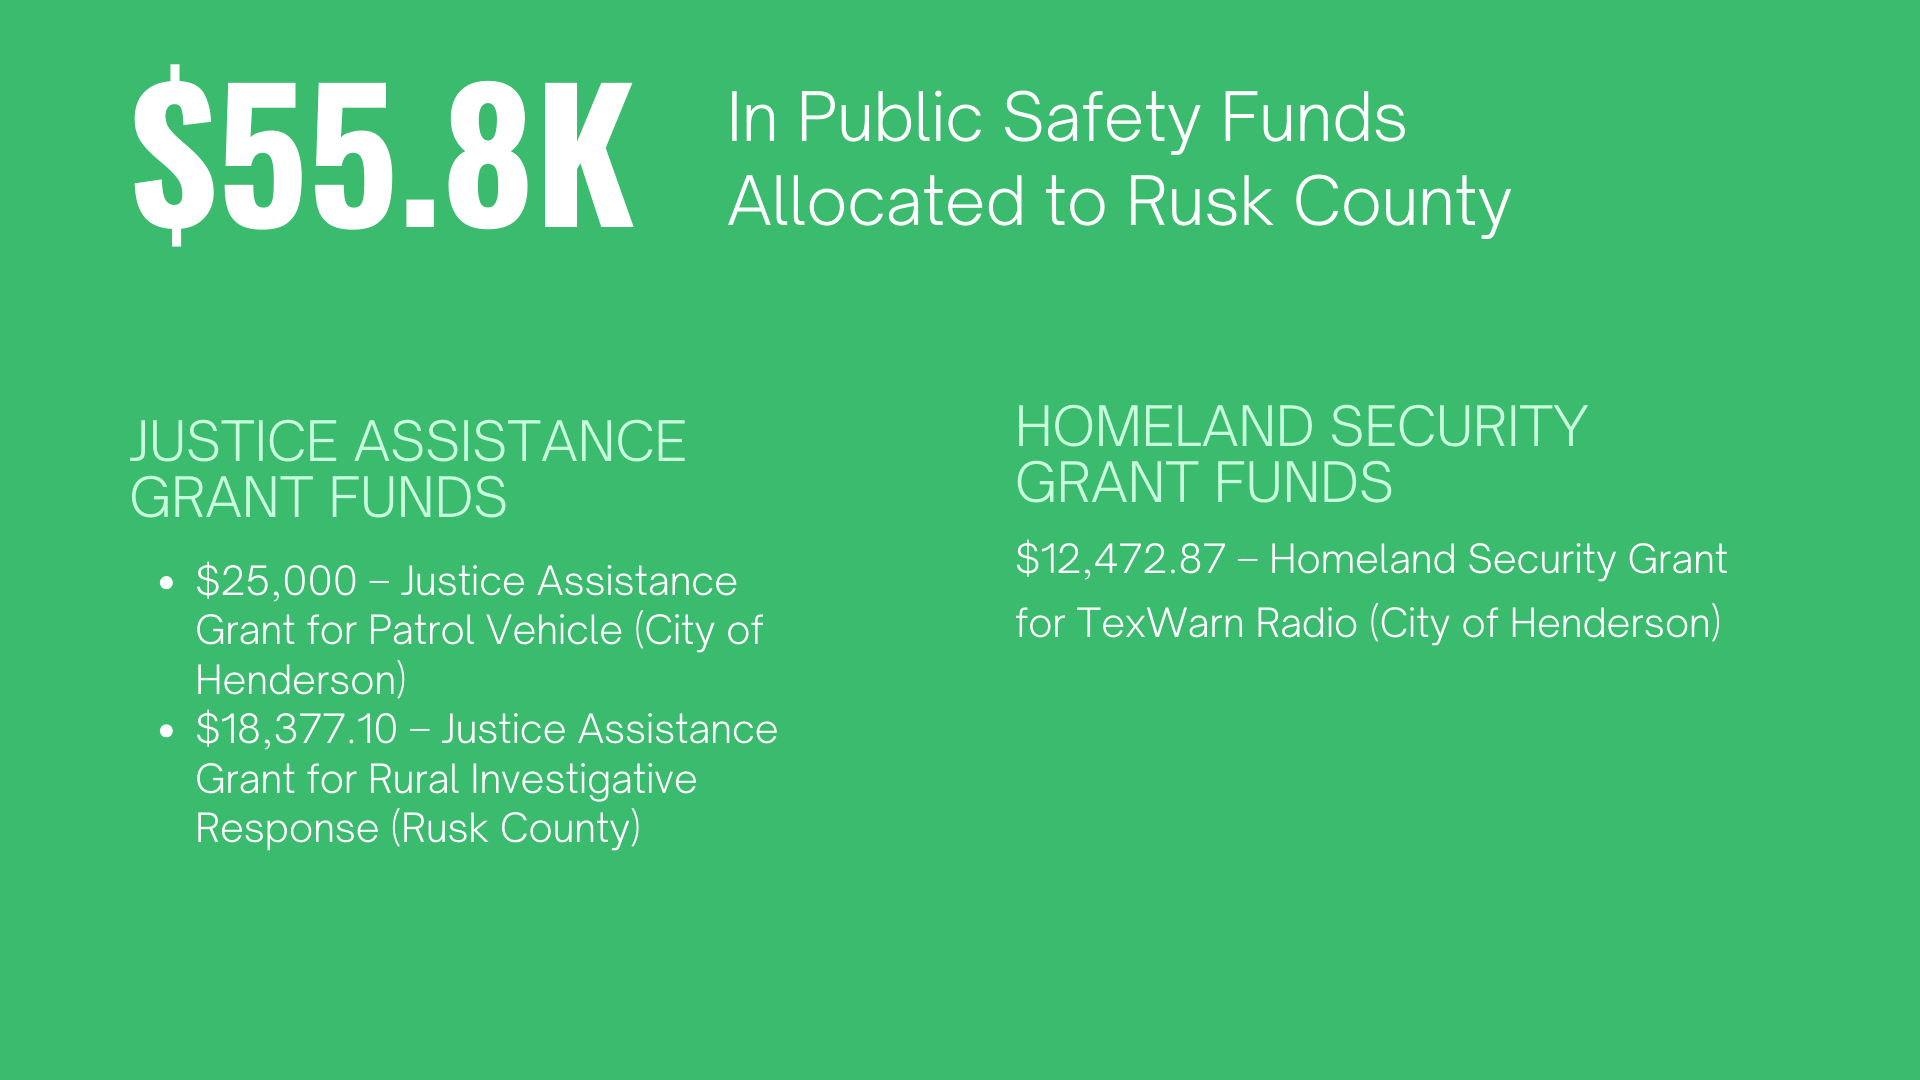 A green background with white text that says `` $ 55.8k in public safety funds allocated to rusk county ''